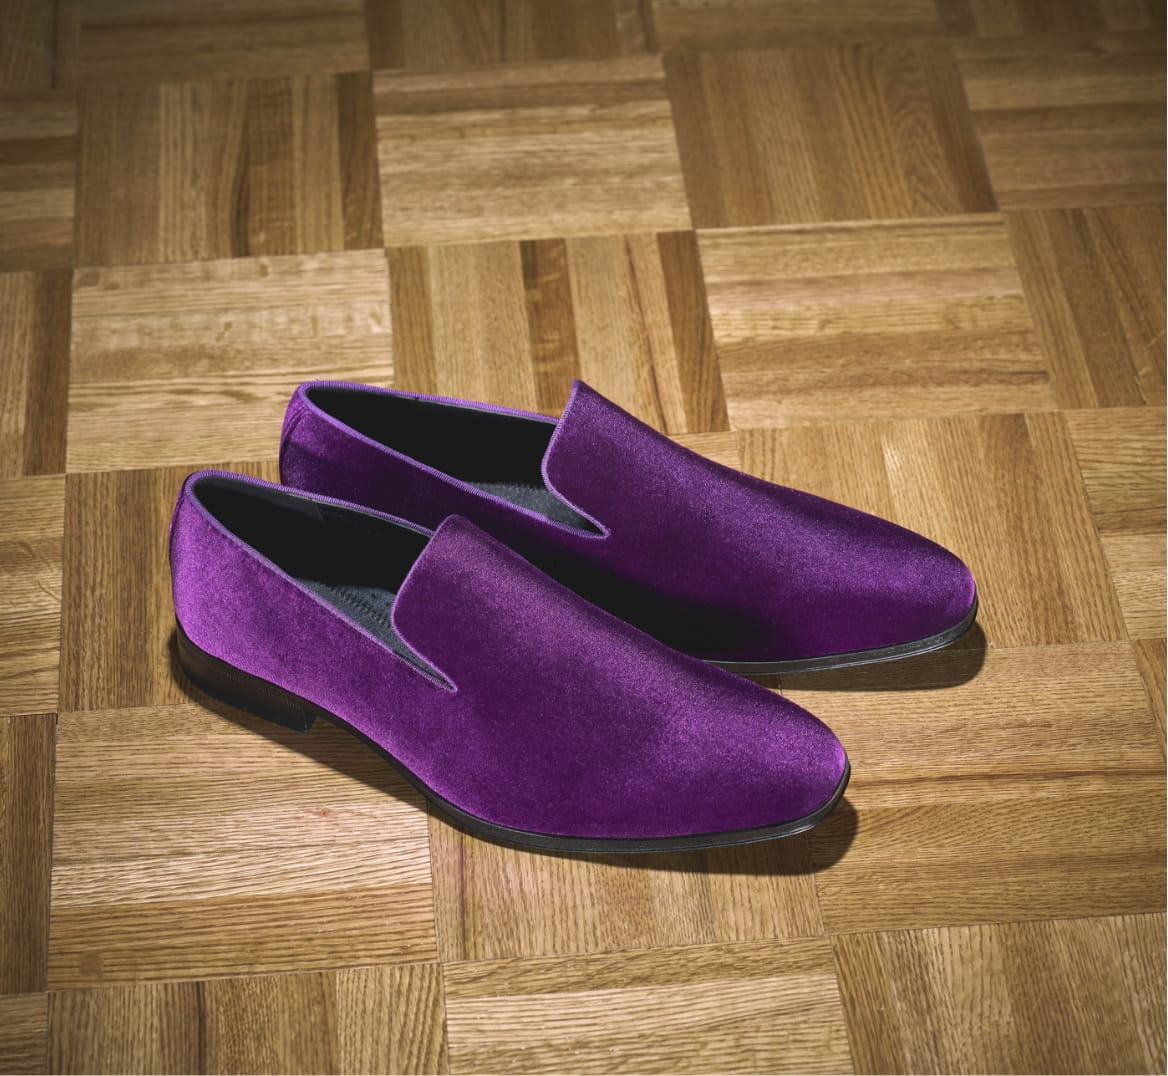 Click to shop Stacy Adams fashion styles. Image features the Savian in purple.